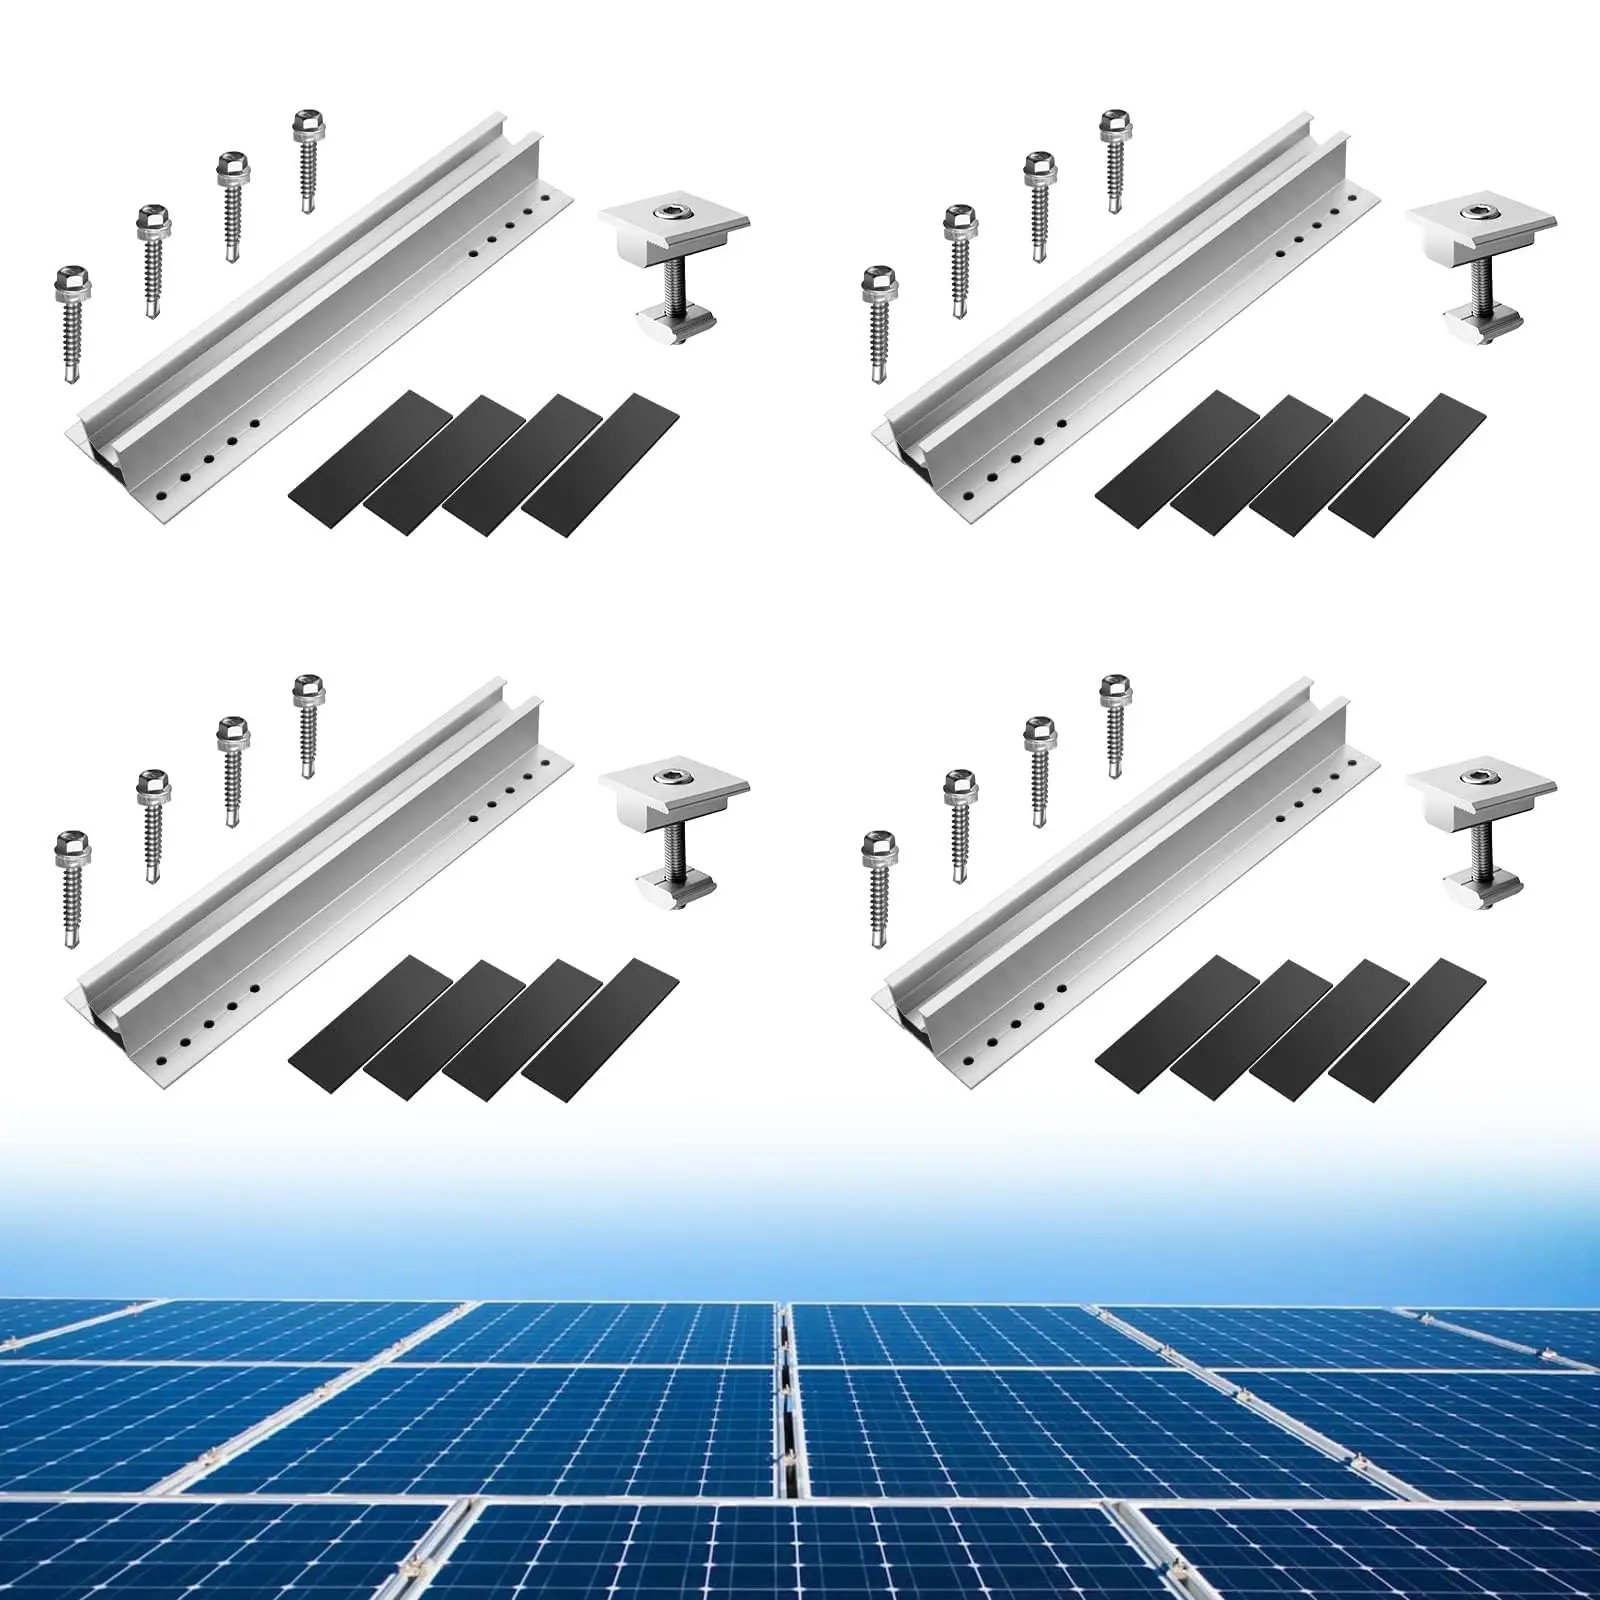 solar panel accessories - What are the accessories of solar